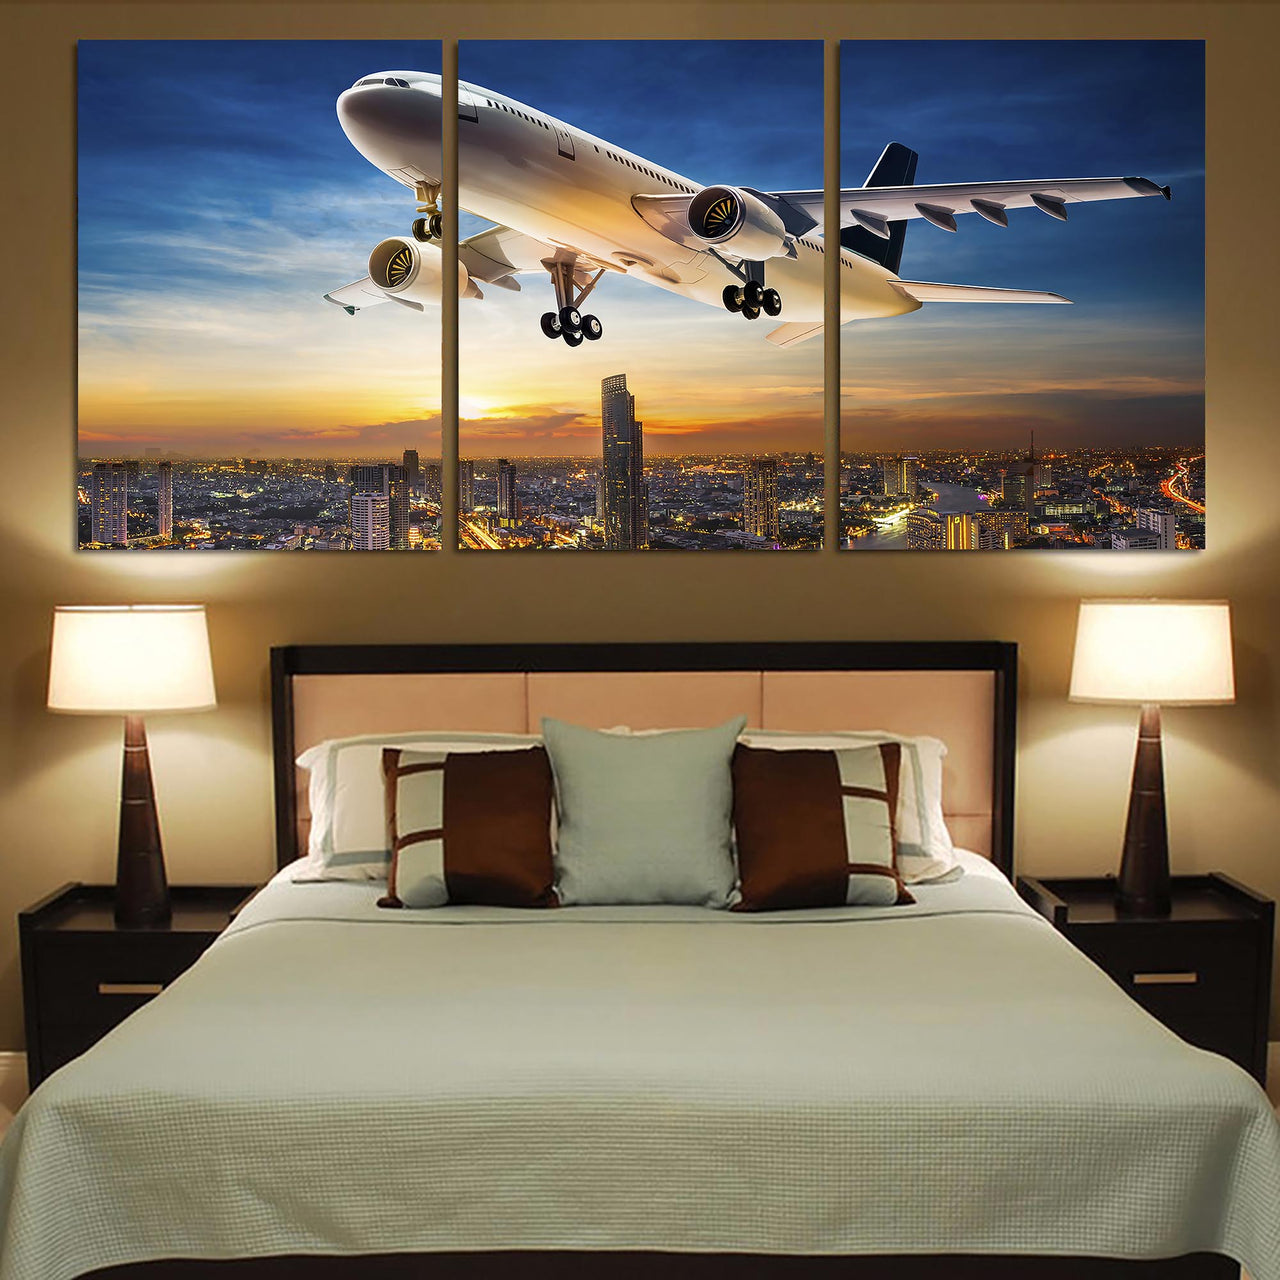 Super Aircraft over City at Sunset Printed Canvas Posters (3 Pieces)